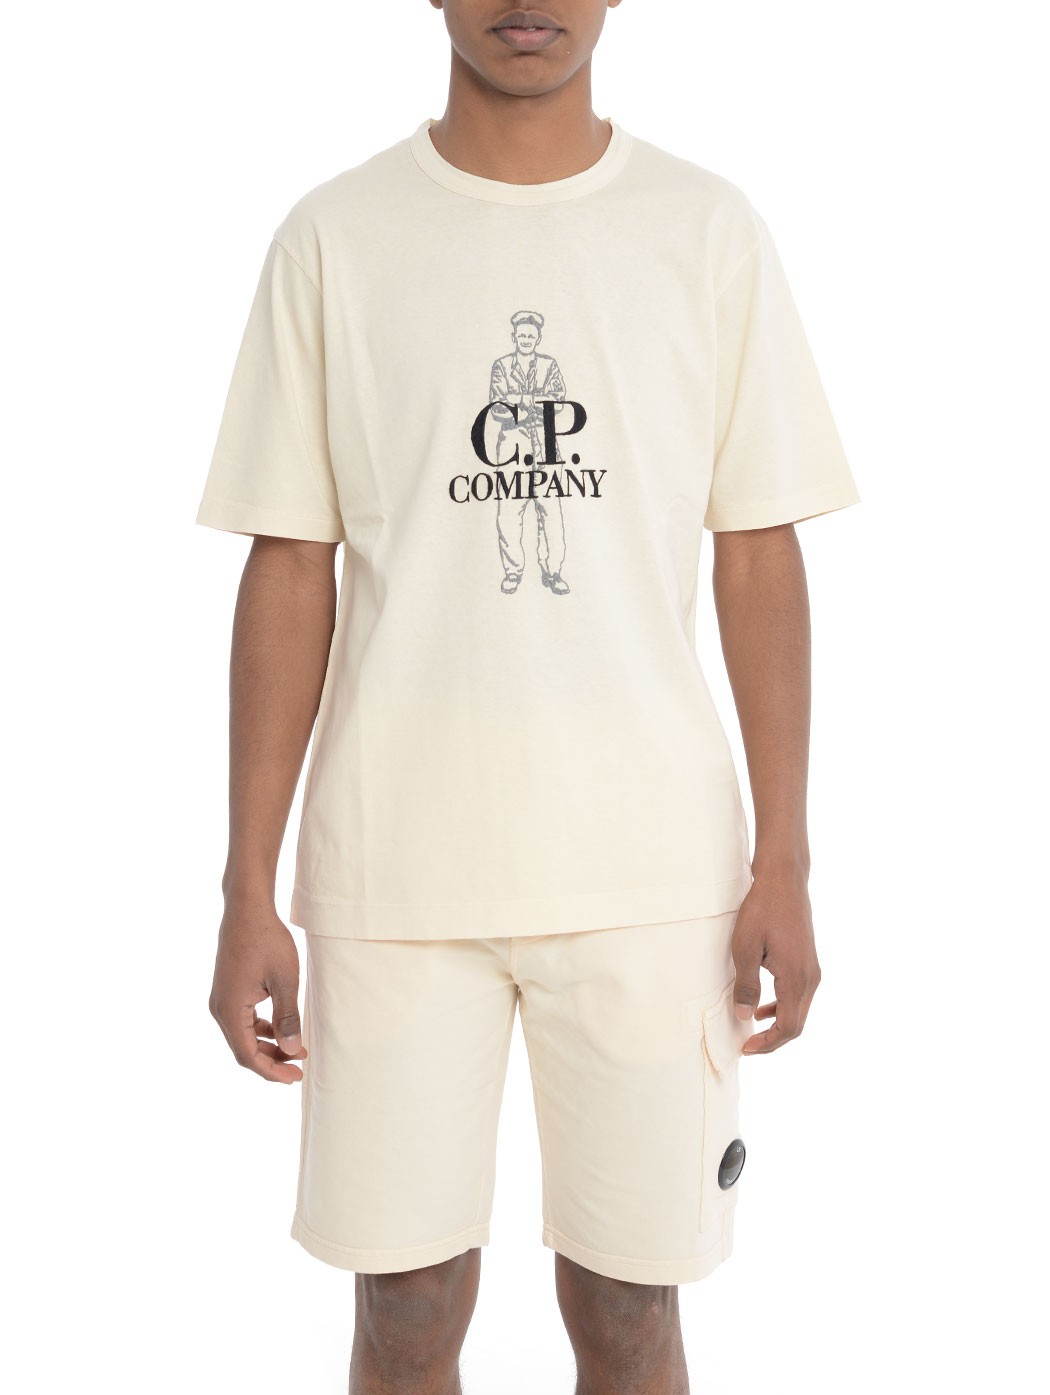 CP COMPANY 16CMTS302A